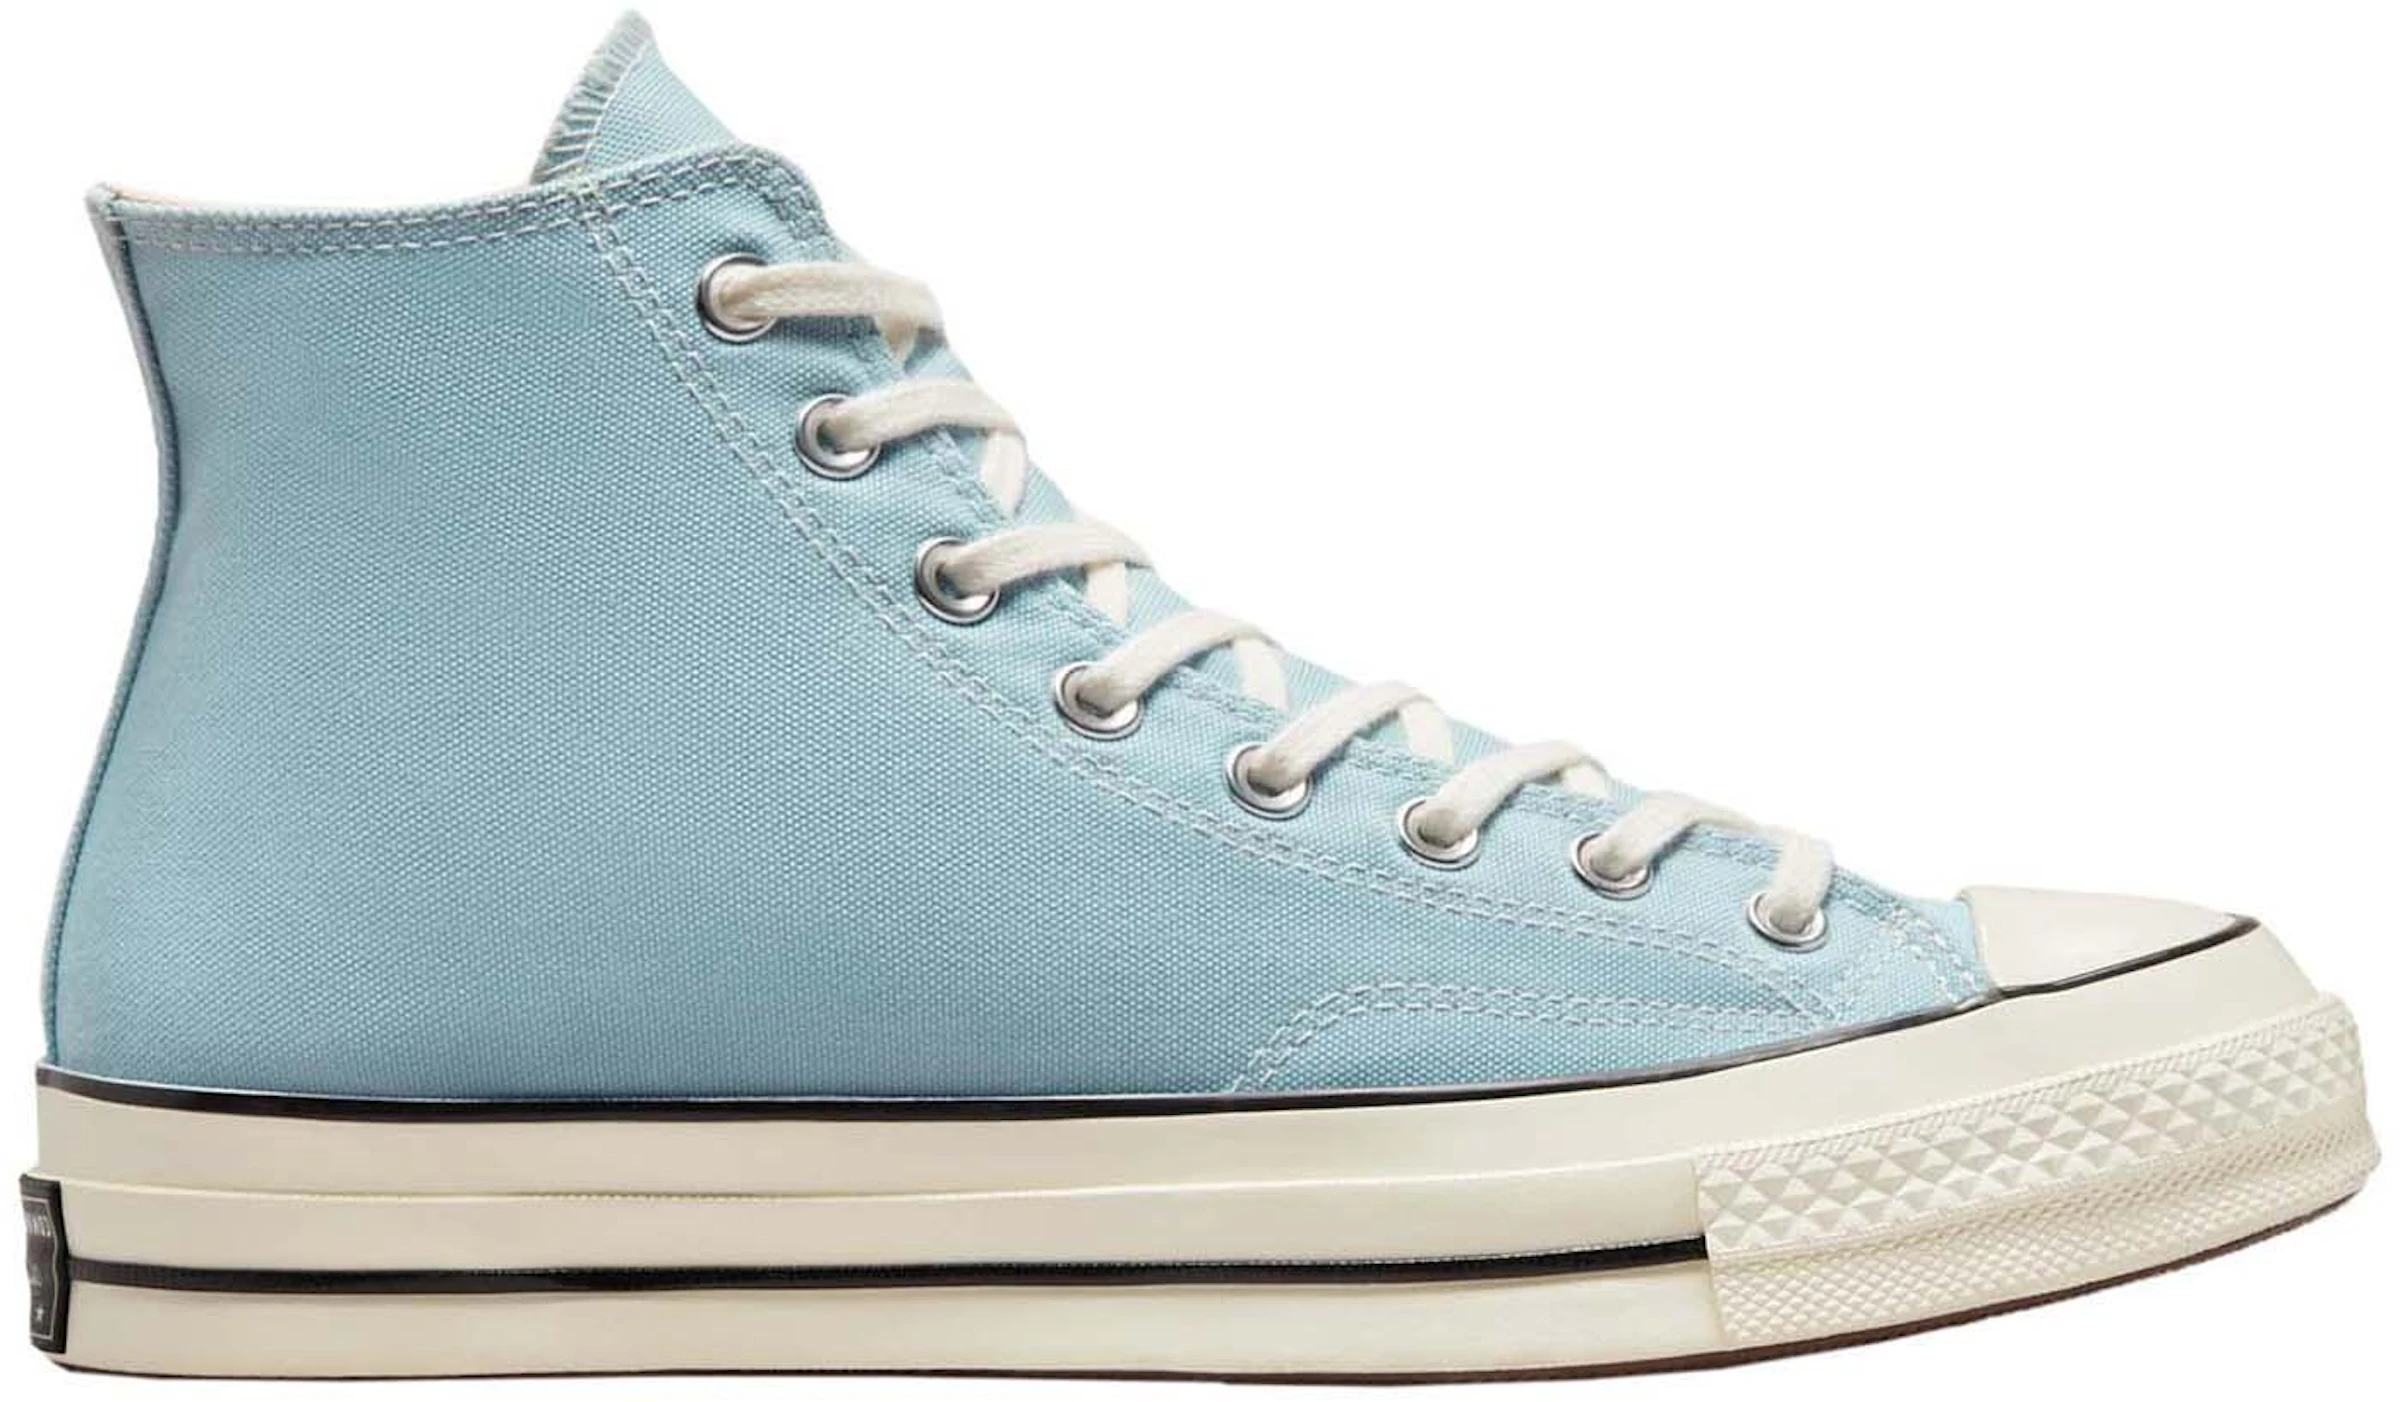 Converse Chuck Taylor All-Star 70 Hi Recycled Light Blue - A00459C - US